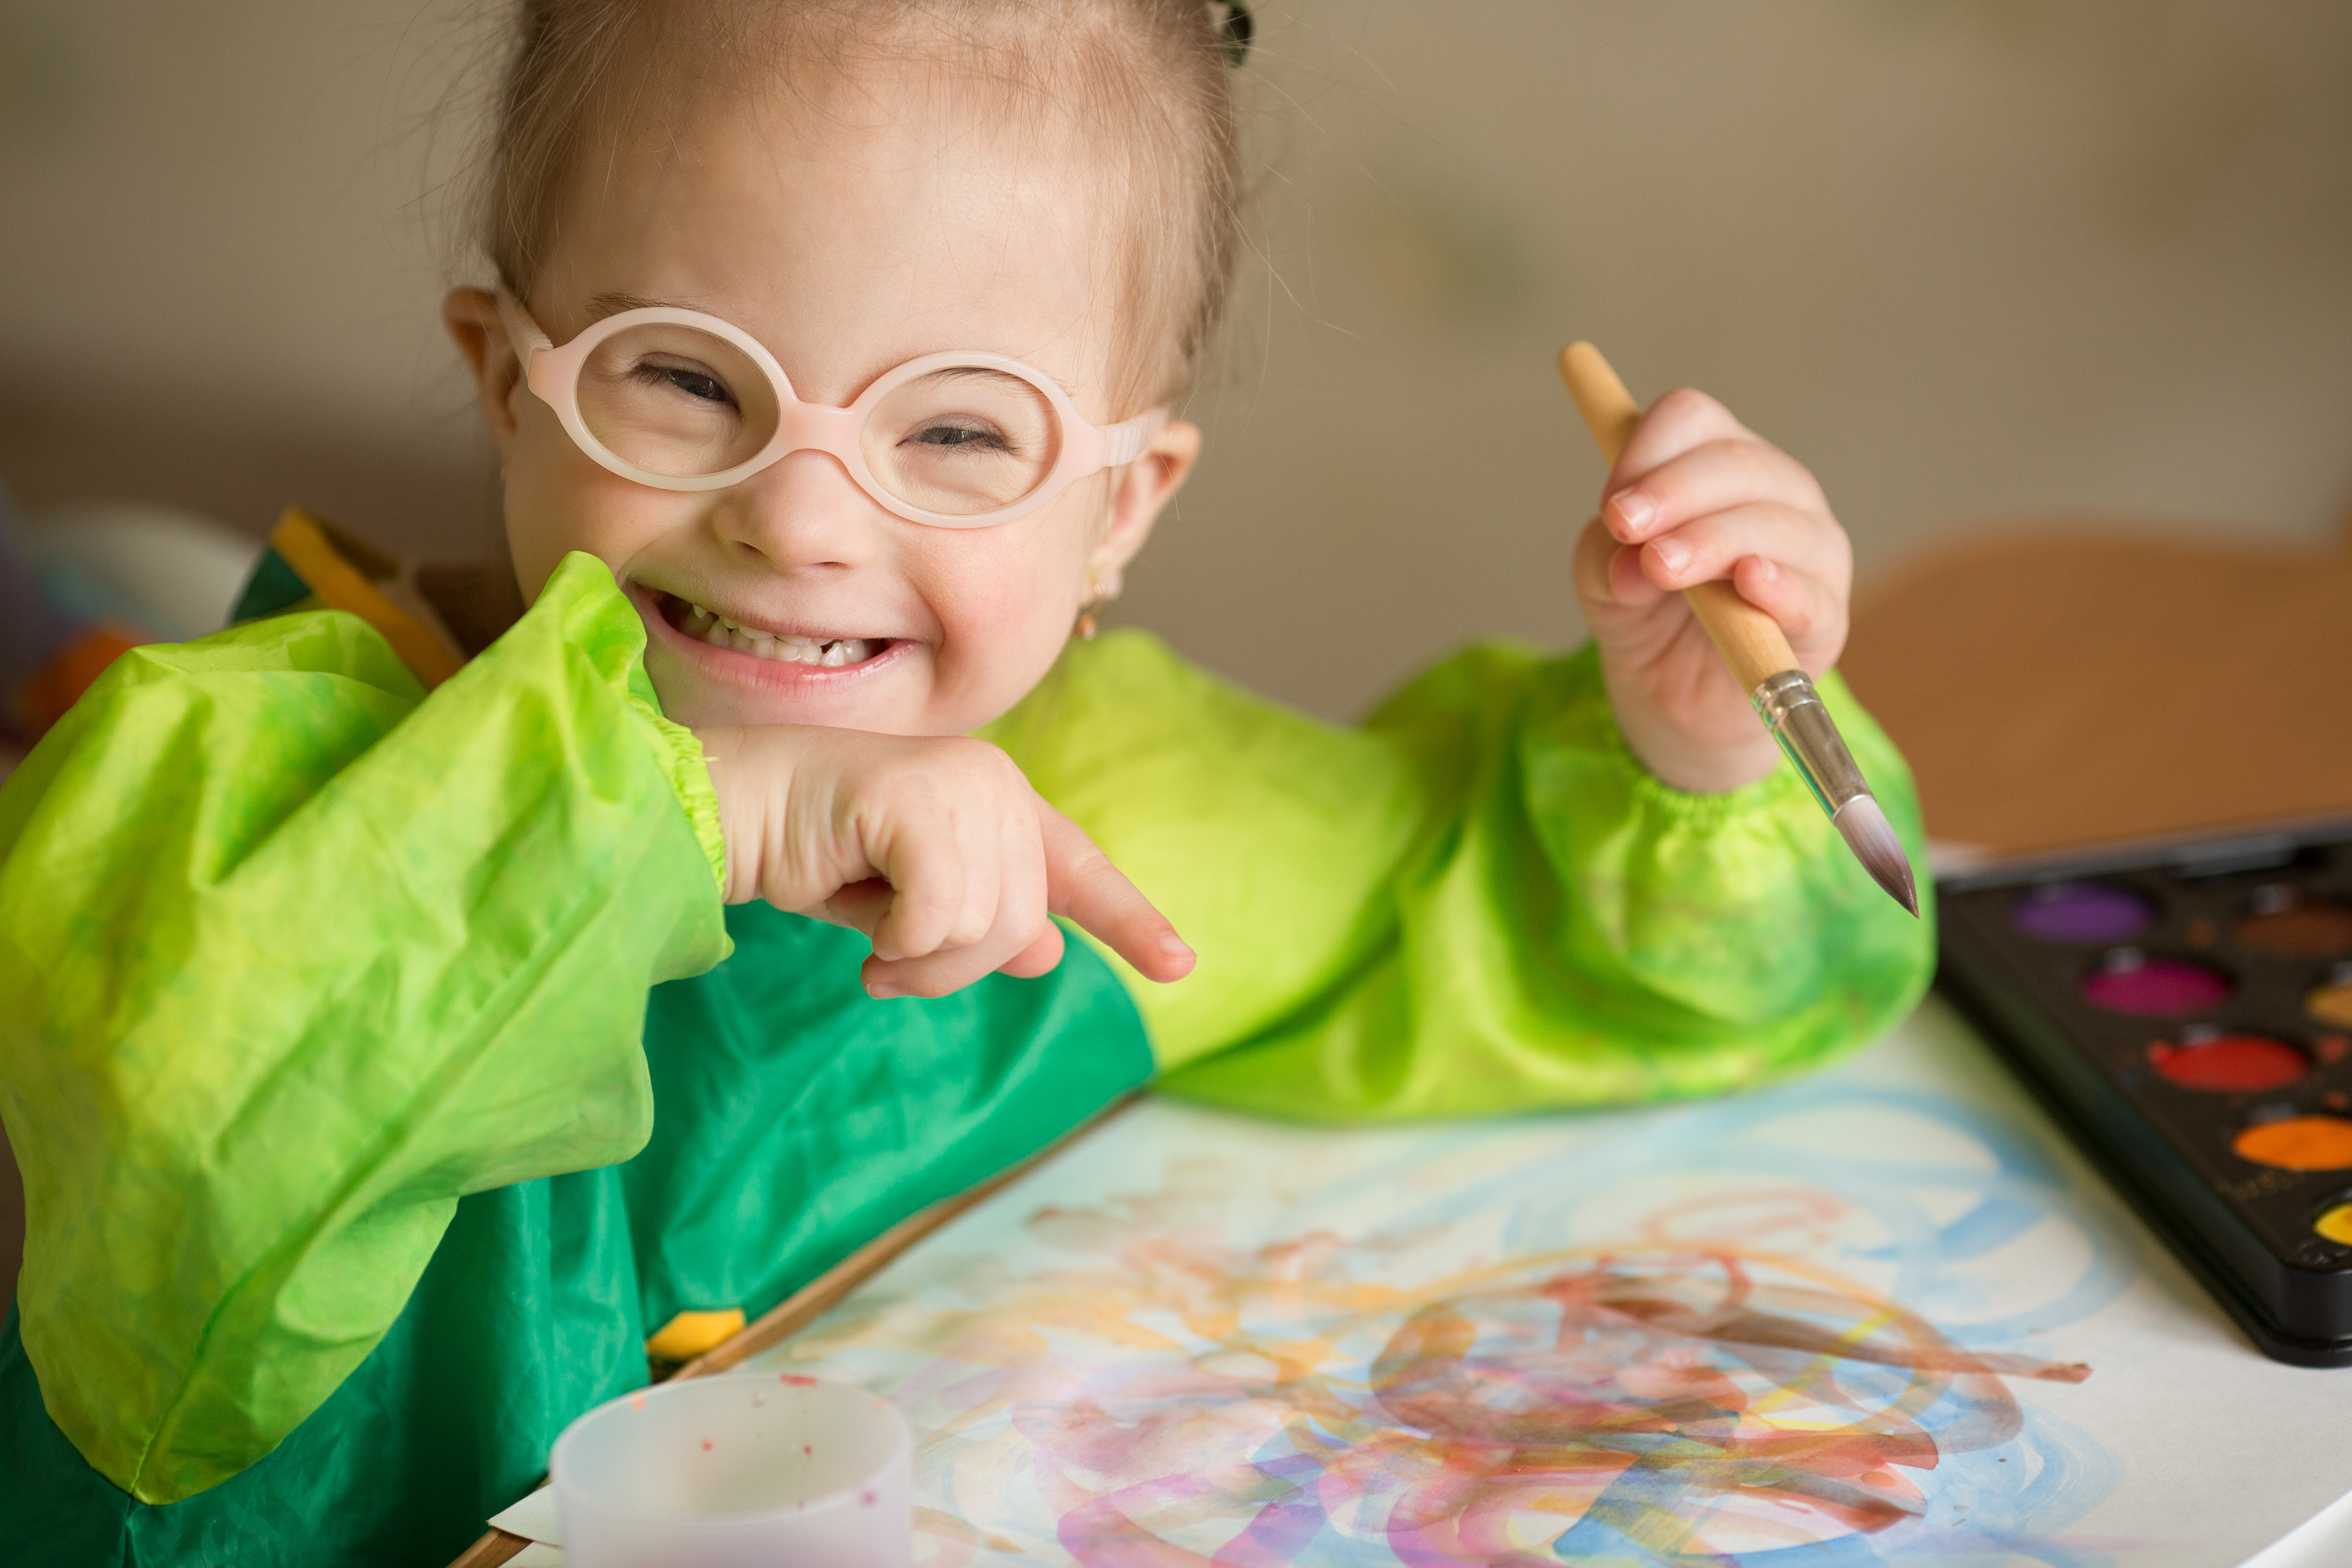 Young white girl with Down syndrome wears glasses and smiles at the camera